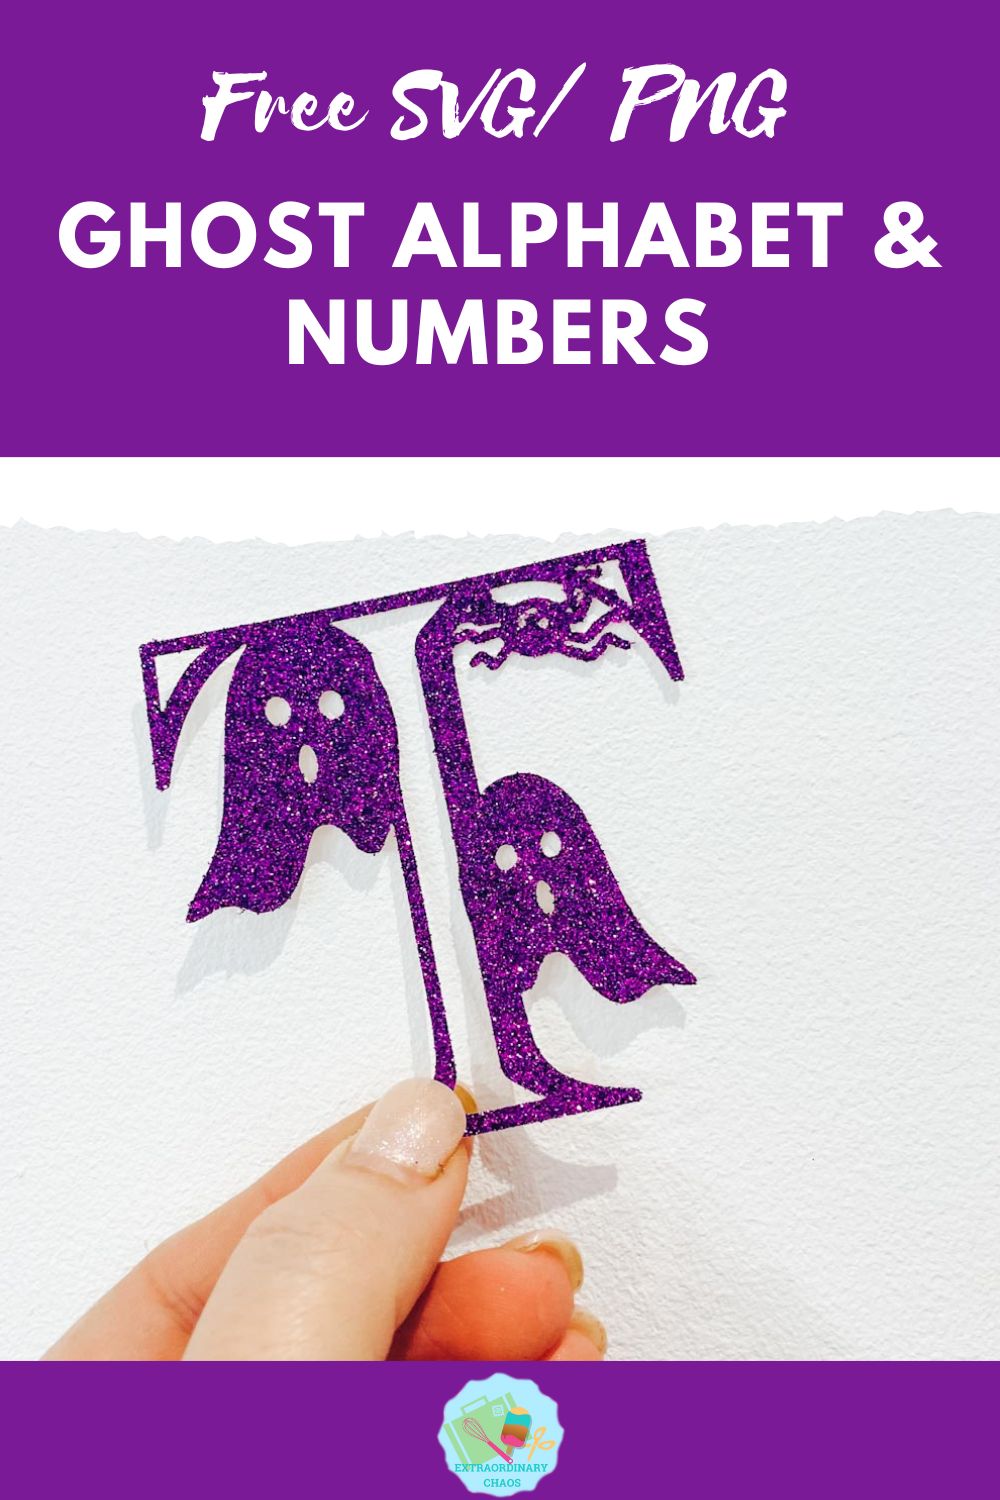 Free Ghost Alphabet and Numbers SVGPNG File for Cricut, Glowforge